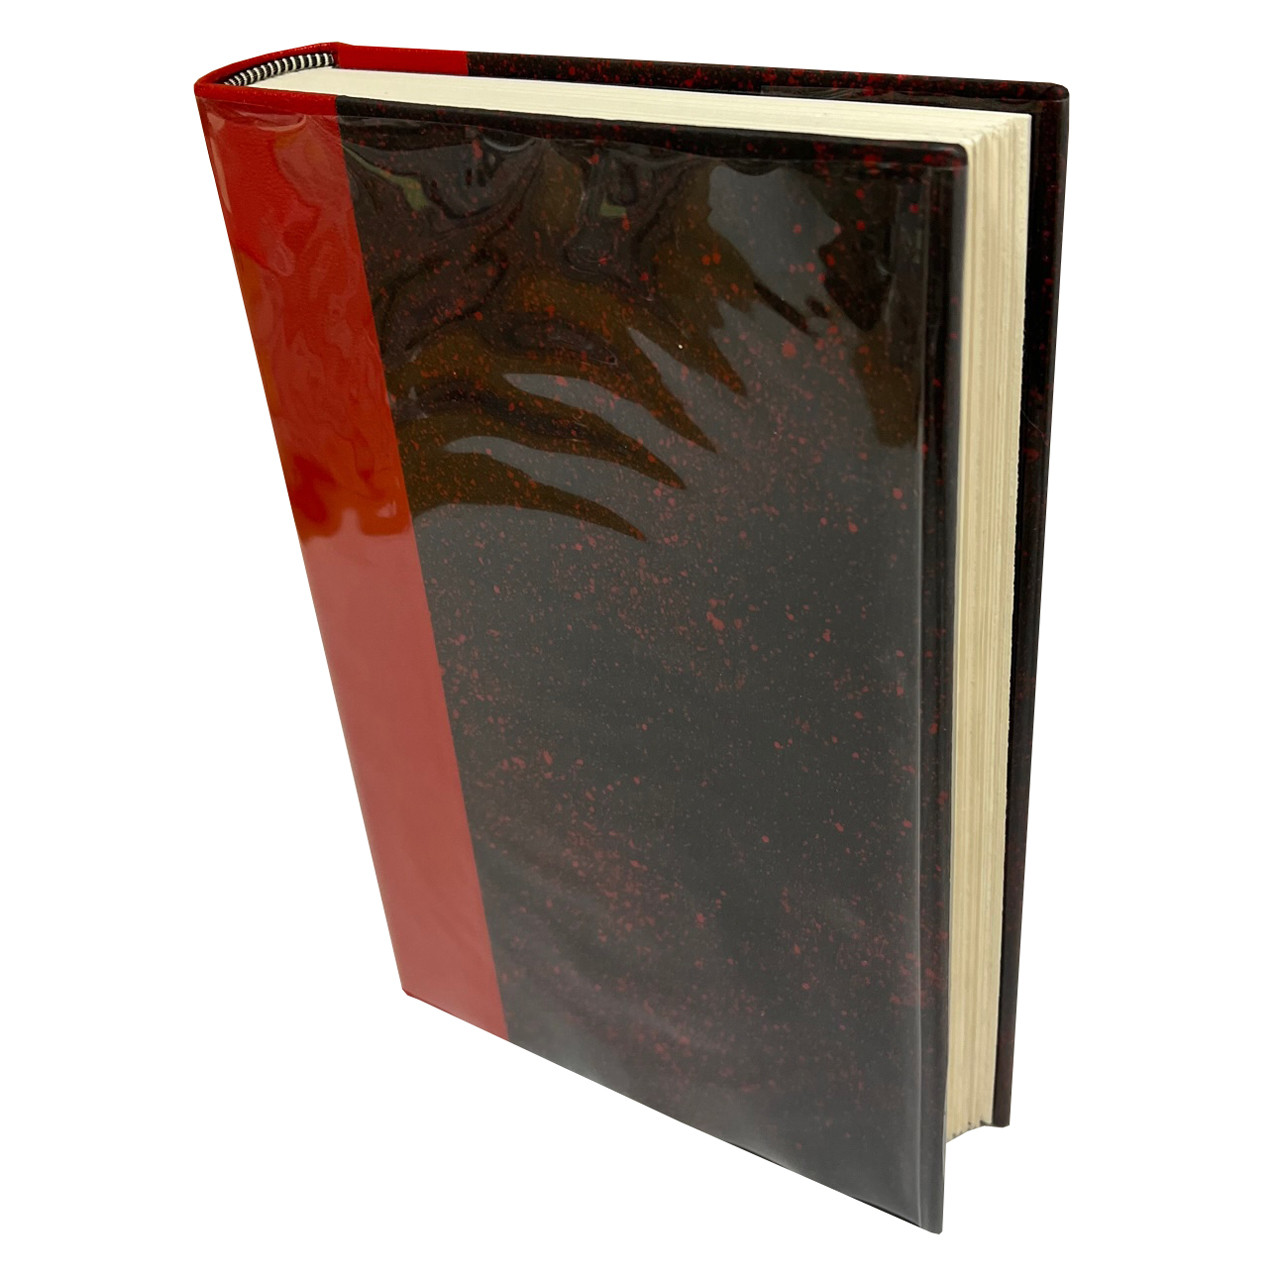 Anne Rice "The Queen Of The Damned" Deluxe Signed Limited Edition No. 73 of 124, Leather Bound Collector's Edition